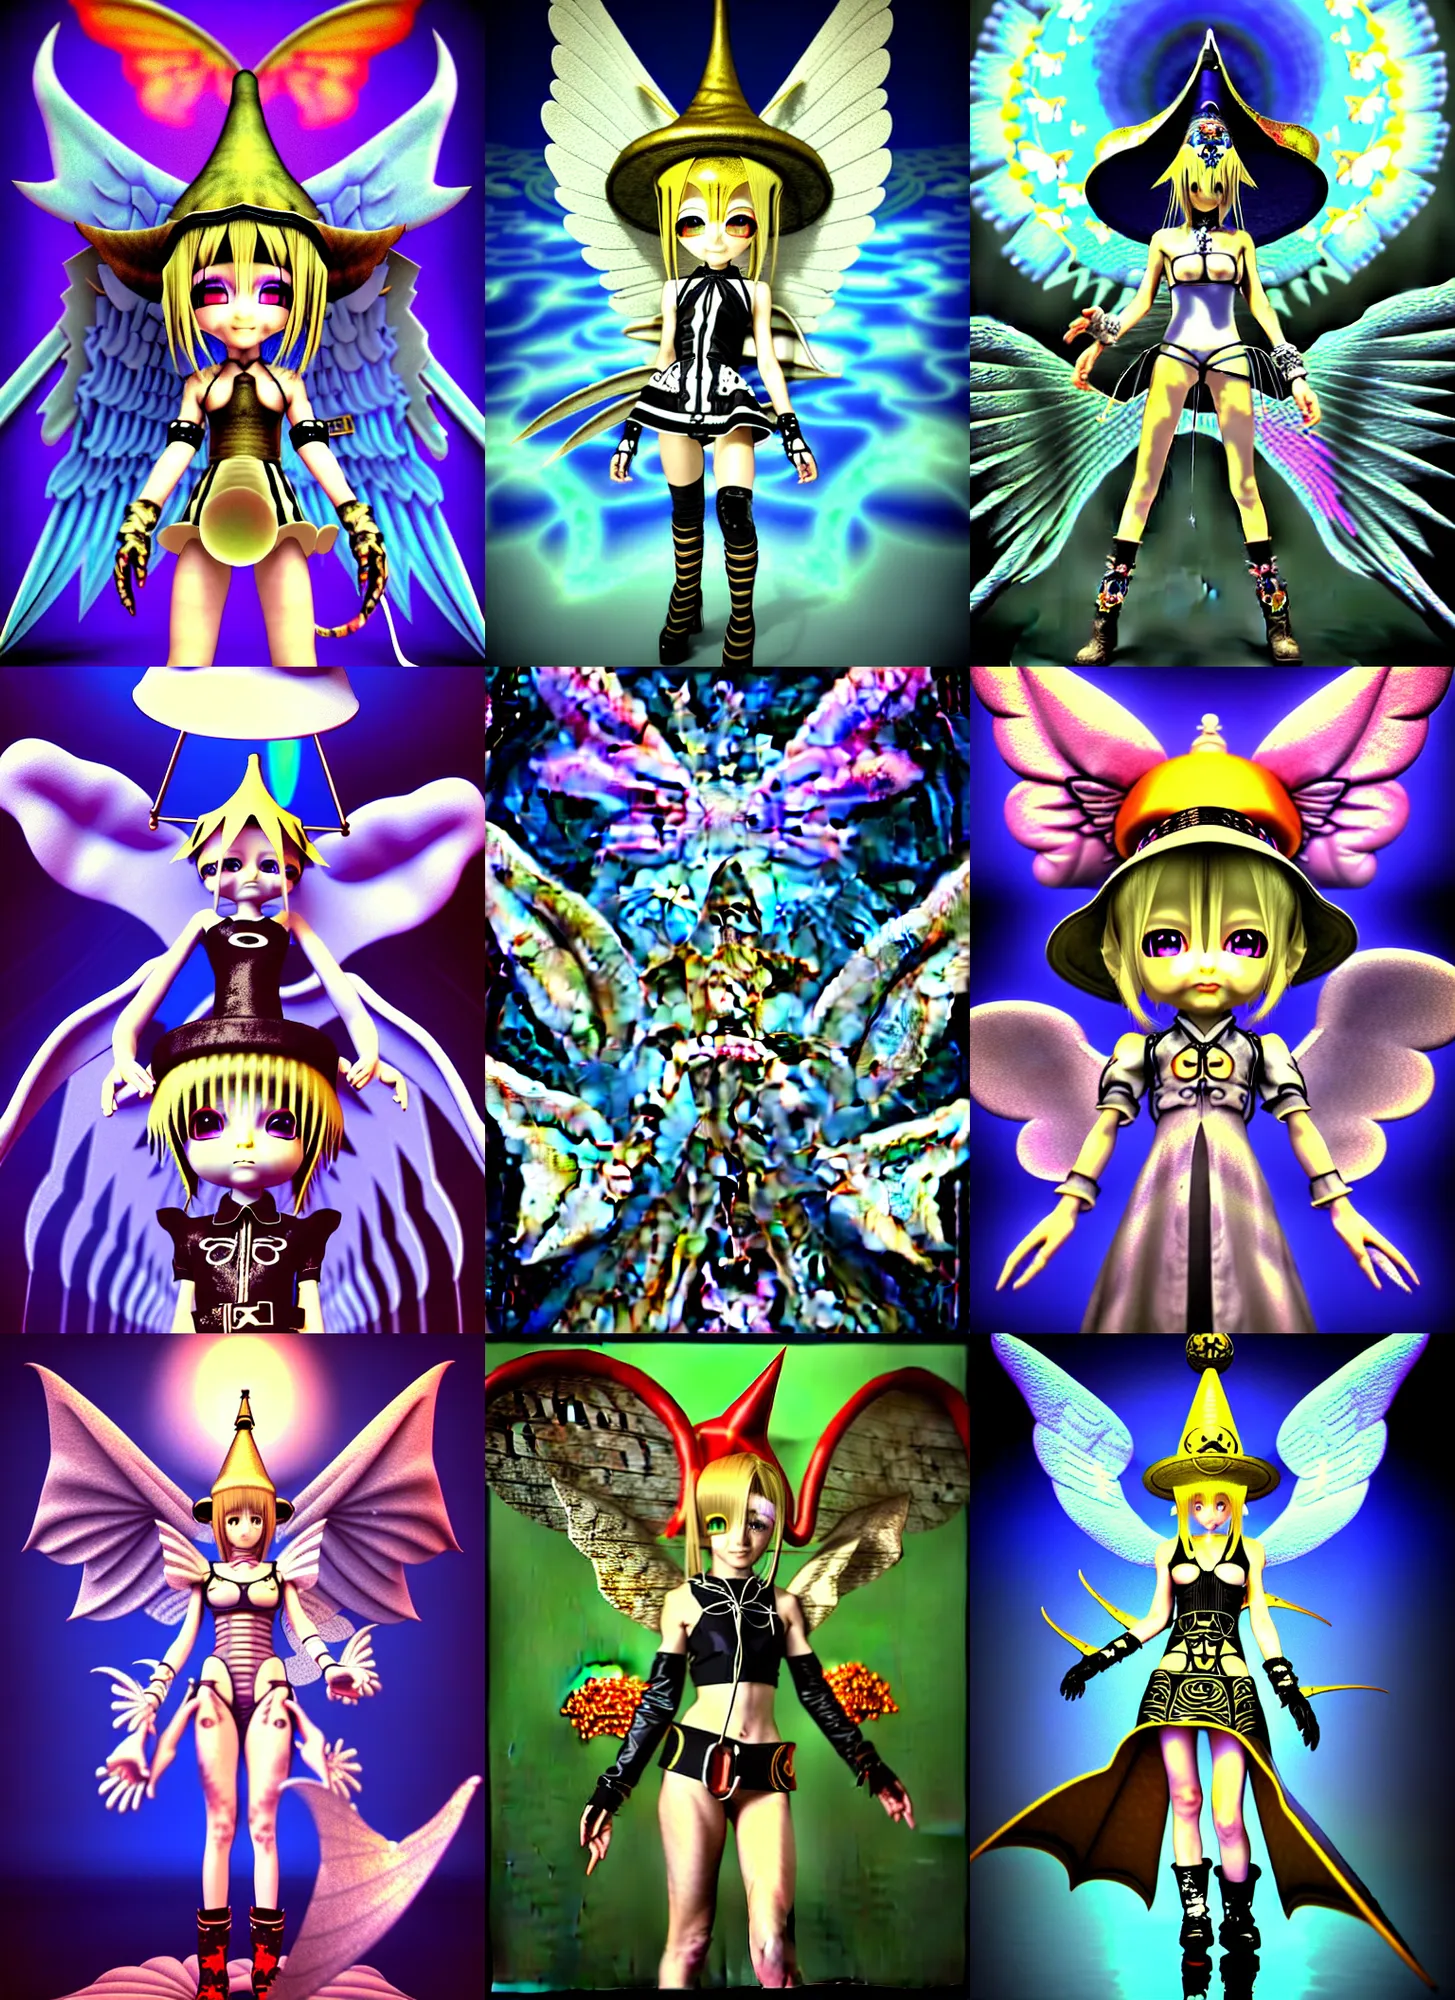 Prompt: vintage cgi 3 d render in the style of micha klein of chibi cyborg demon with angel wings by final fantasy ix by ichiro tanida wearing a big wizard hat against a psychedelic swirly background with 3 d butterflies and 3 d flowers n the style of 1 9 9 0's cg graphics 3 d rendered y 2 k aesthetic by ichiro tanida, 3 do magazine